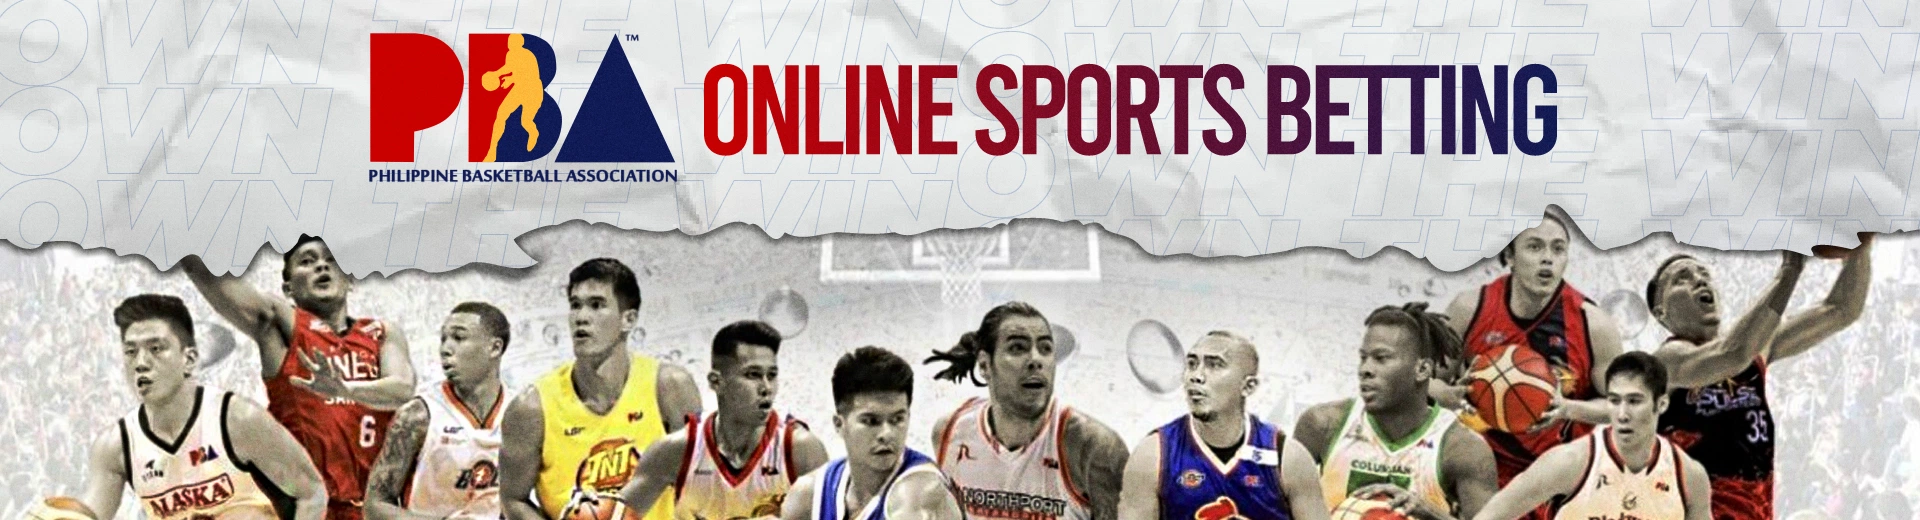 The Complete Guide to PBA Online Sports Betting - OKBET sports betting